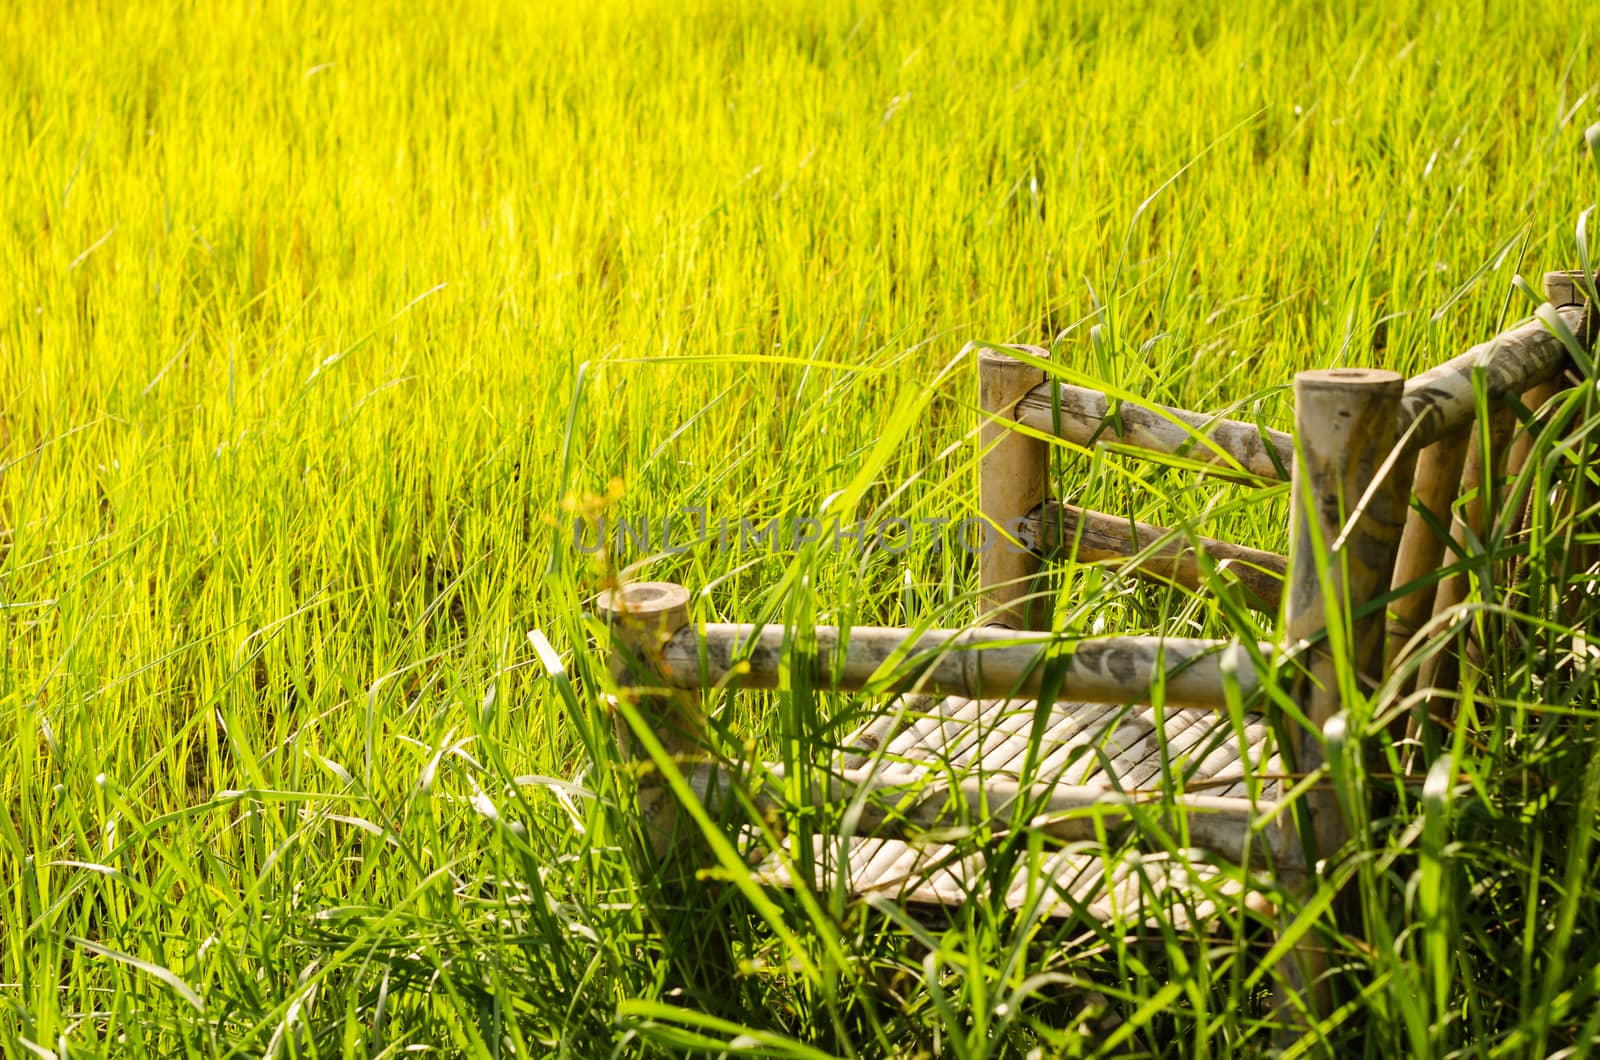 Bamboo wooden chairs on grass by sweetcrisis